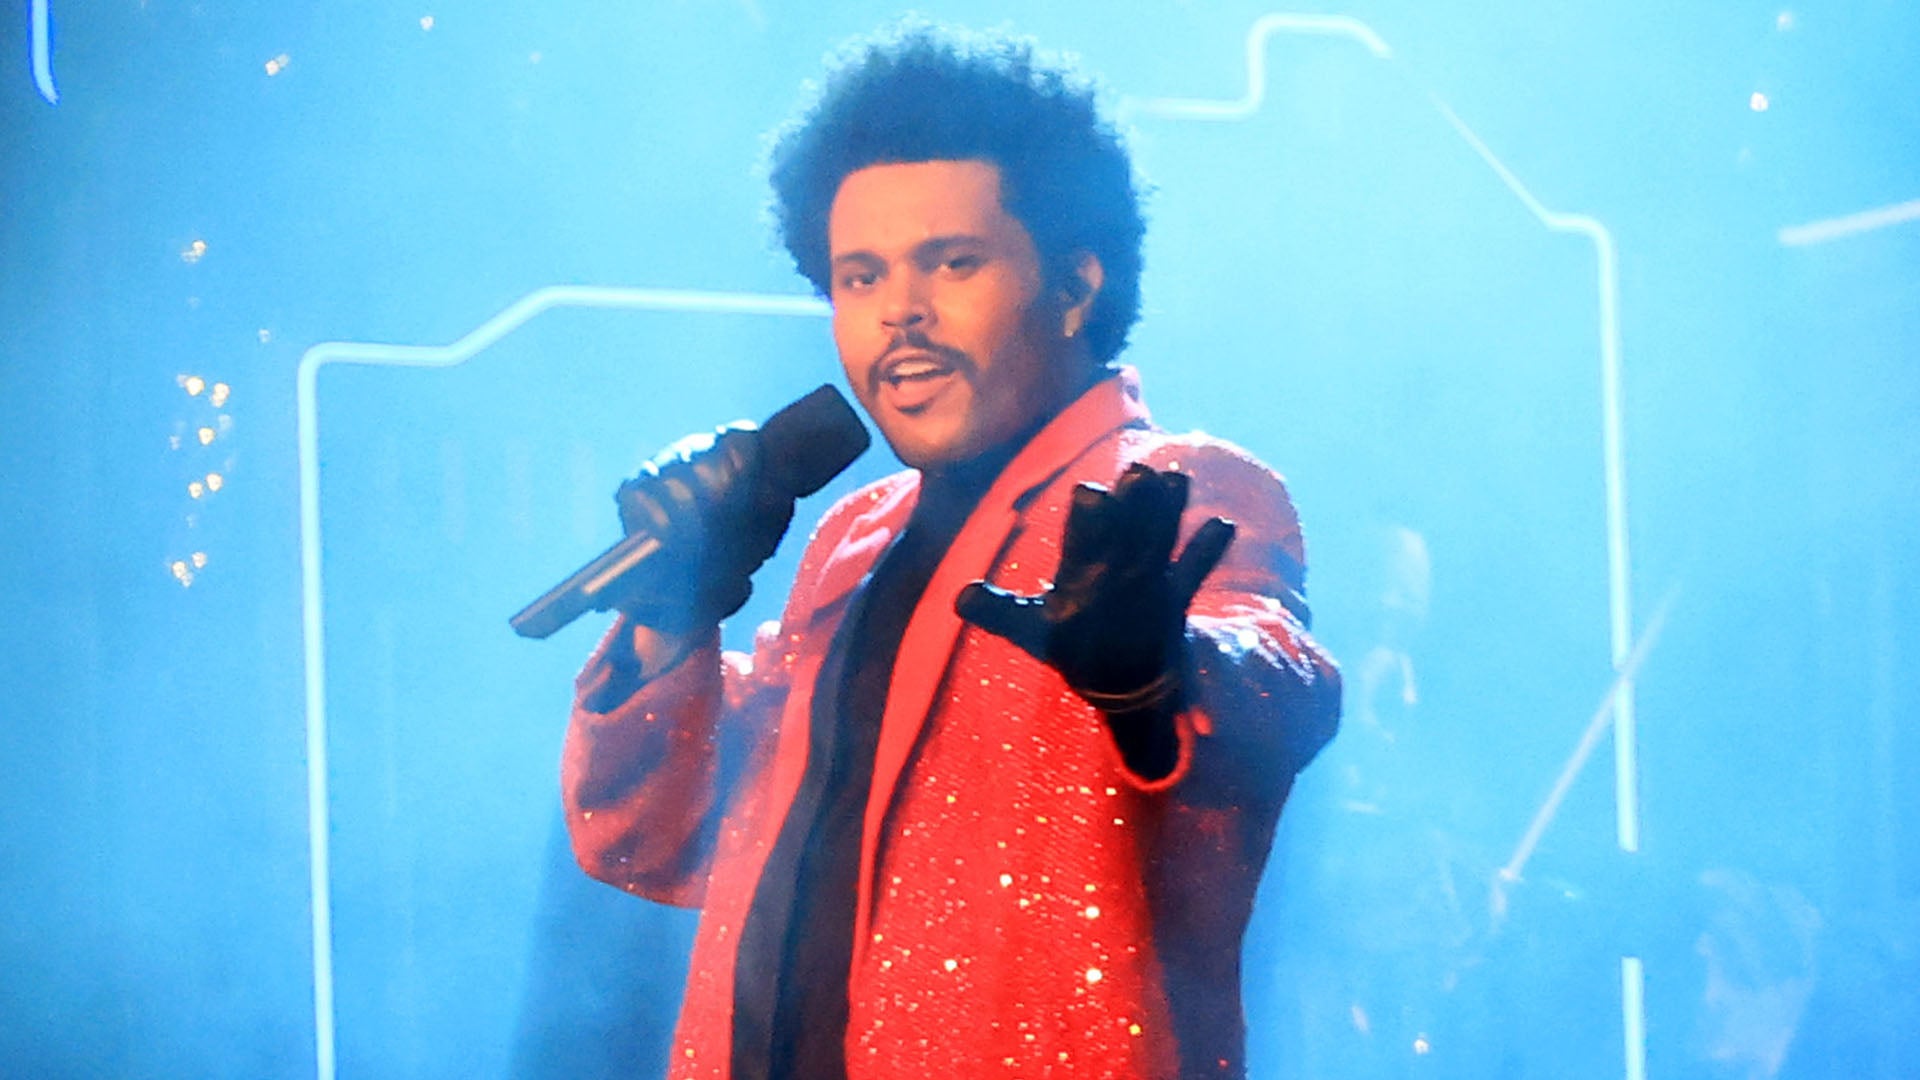 The Weeknd shares details about Super Bowl halftime show